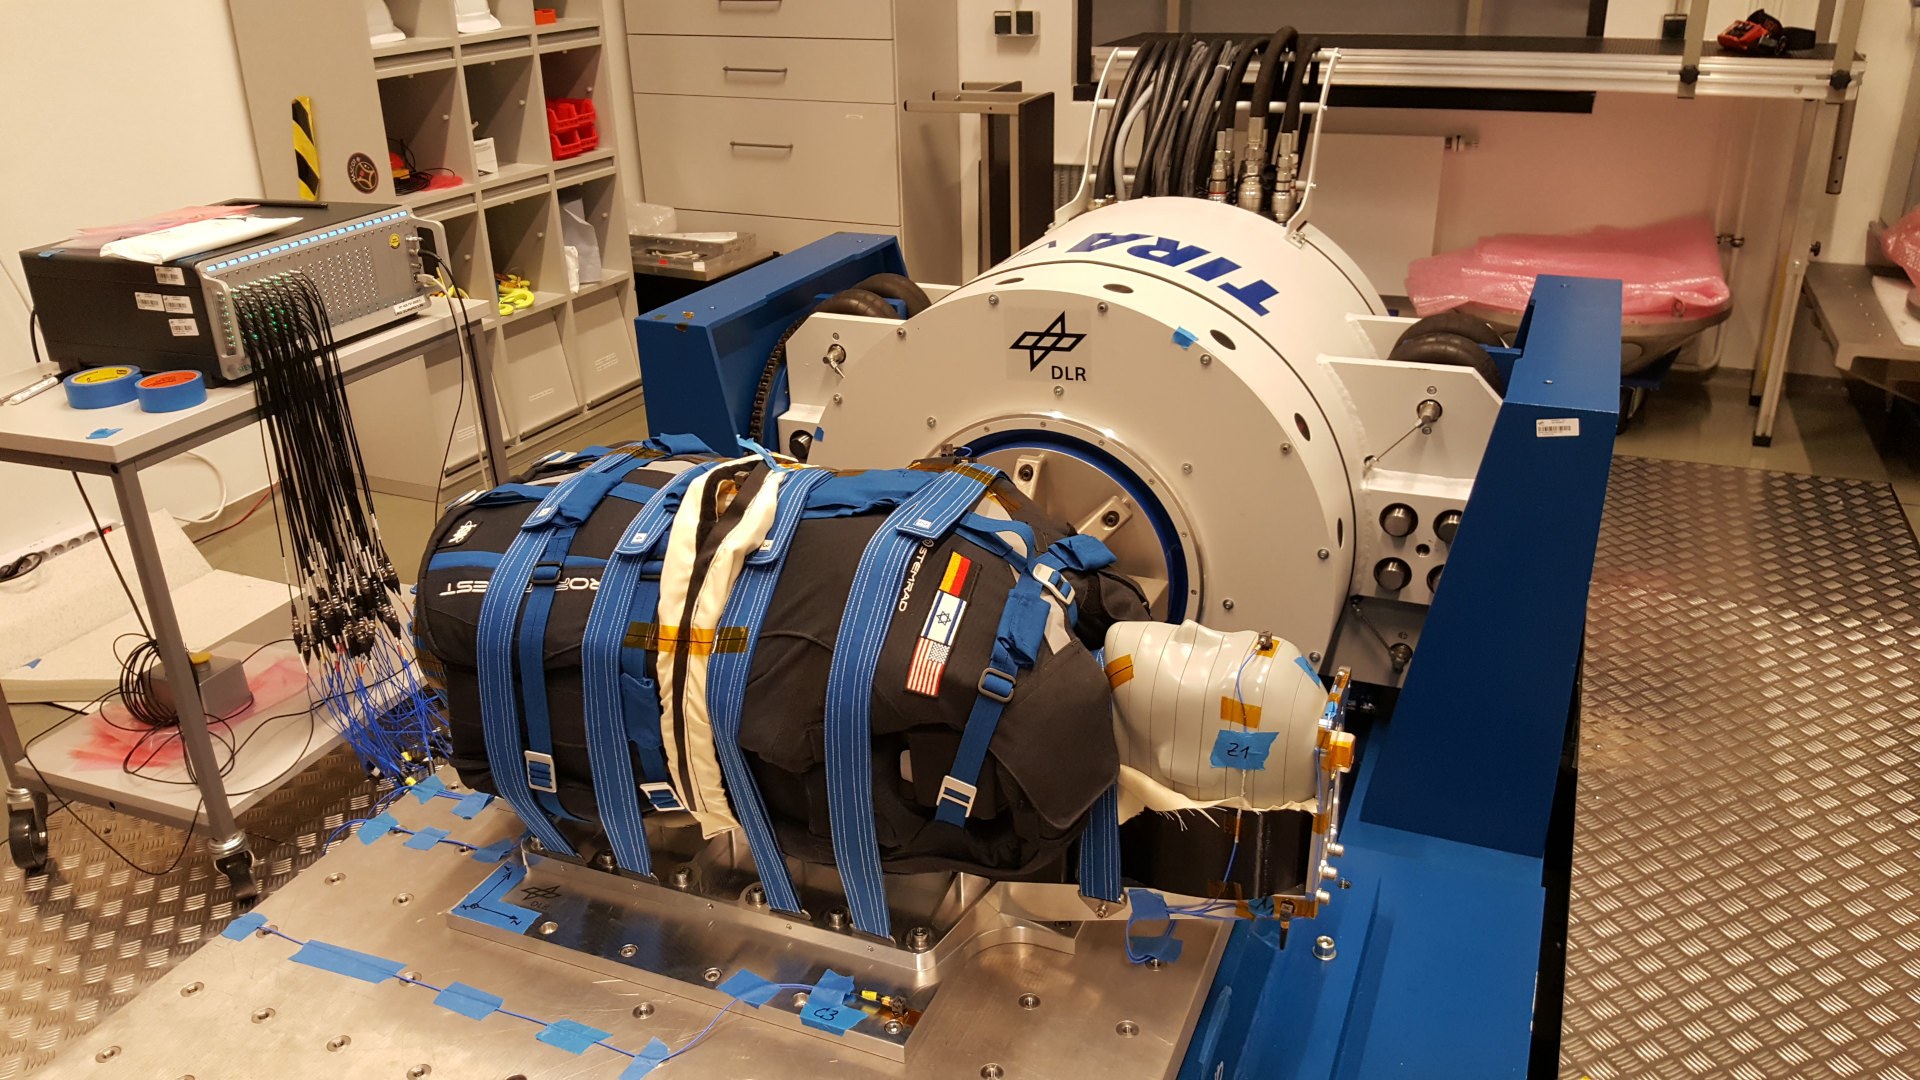 Zohar during the second vibration test